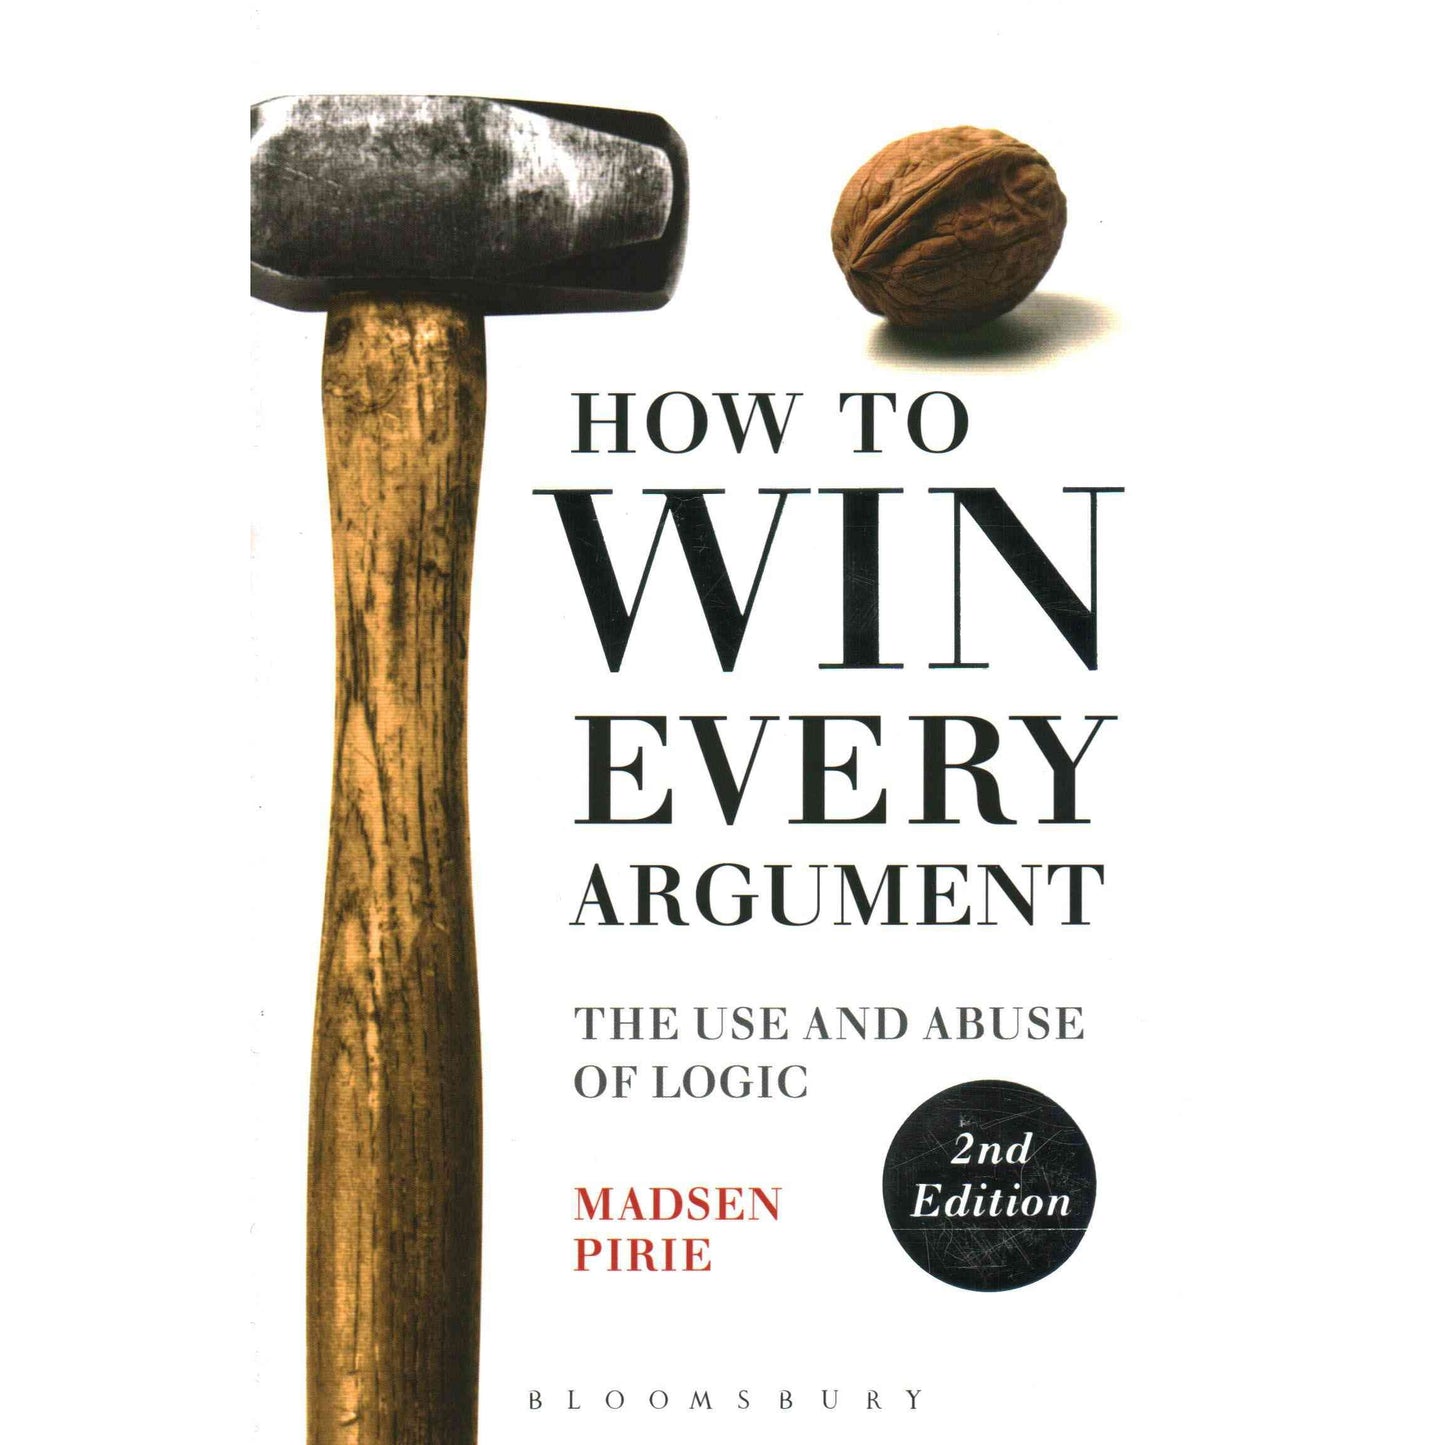 How To Win Every Argument